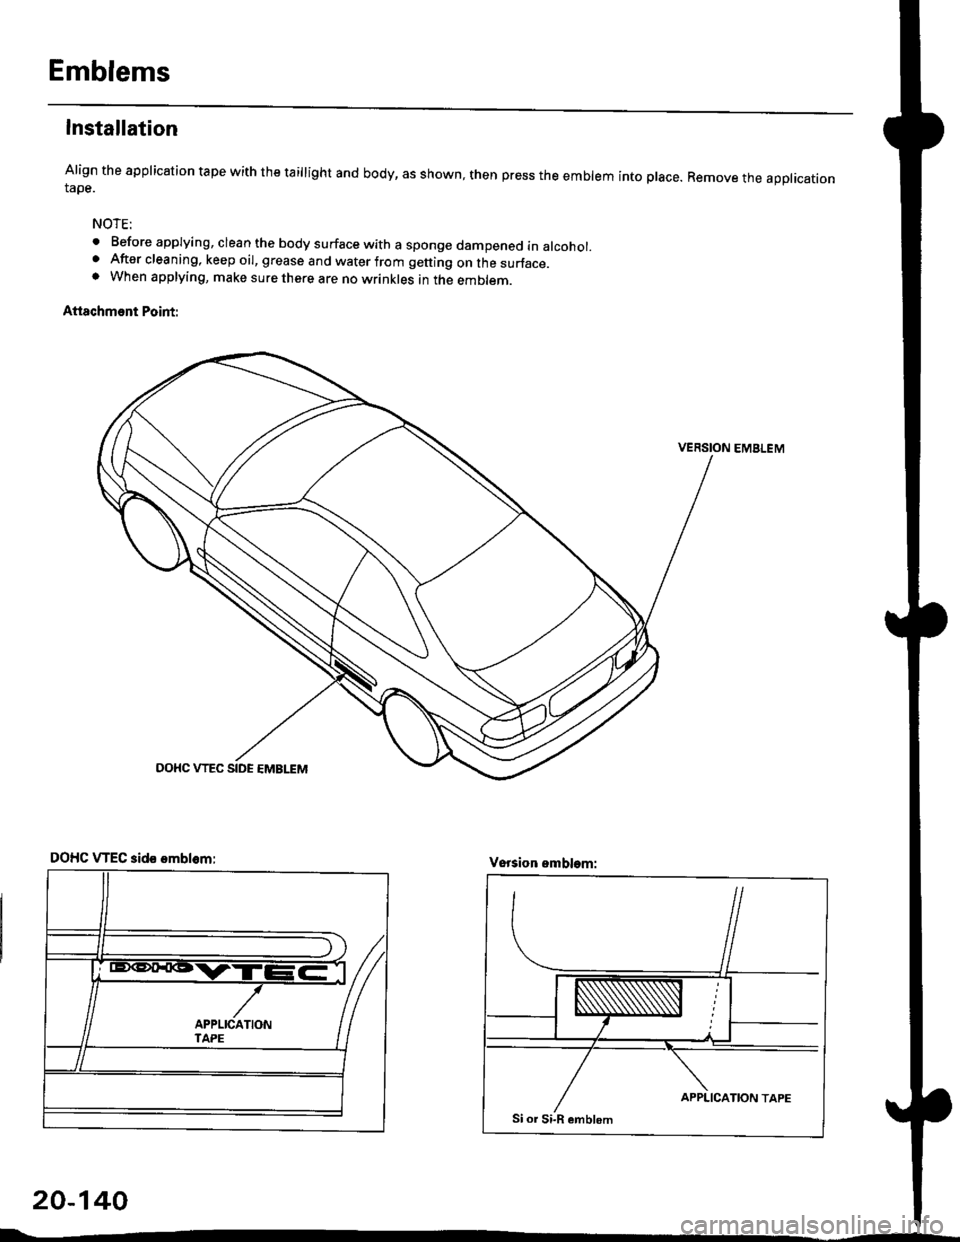 HONDA CIVIC 1999 6.G Service Manual Emblems
Installation
Align the application tape with the taillight and body, as shown, then press the emblem into place. Remove the appticationtape.
NOTE:
o Before applying, clean the body surface wit